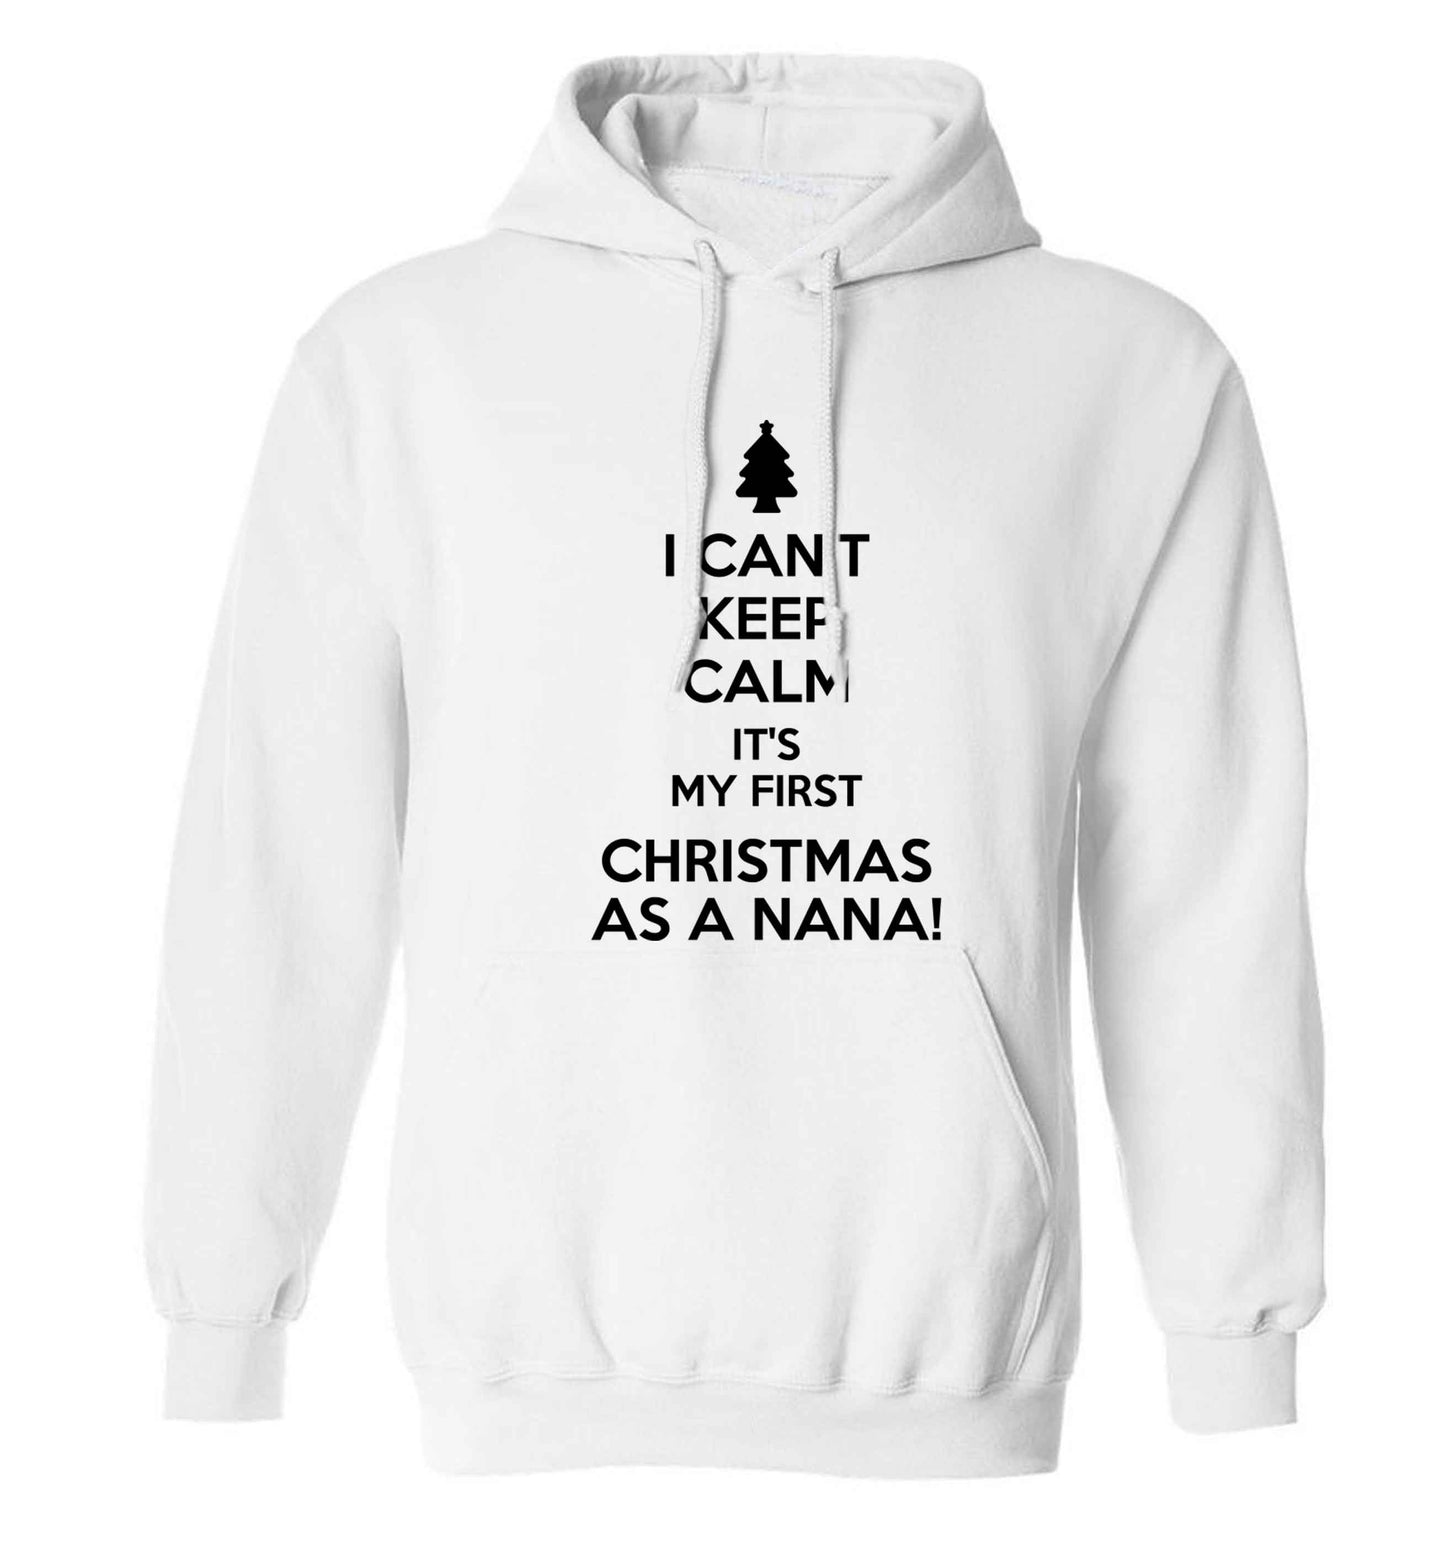 I can't keep calm it's my first Christmas as a nana! adults unisex white hoodie 2XL